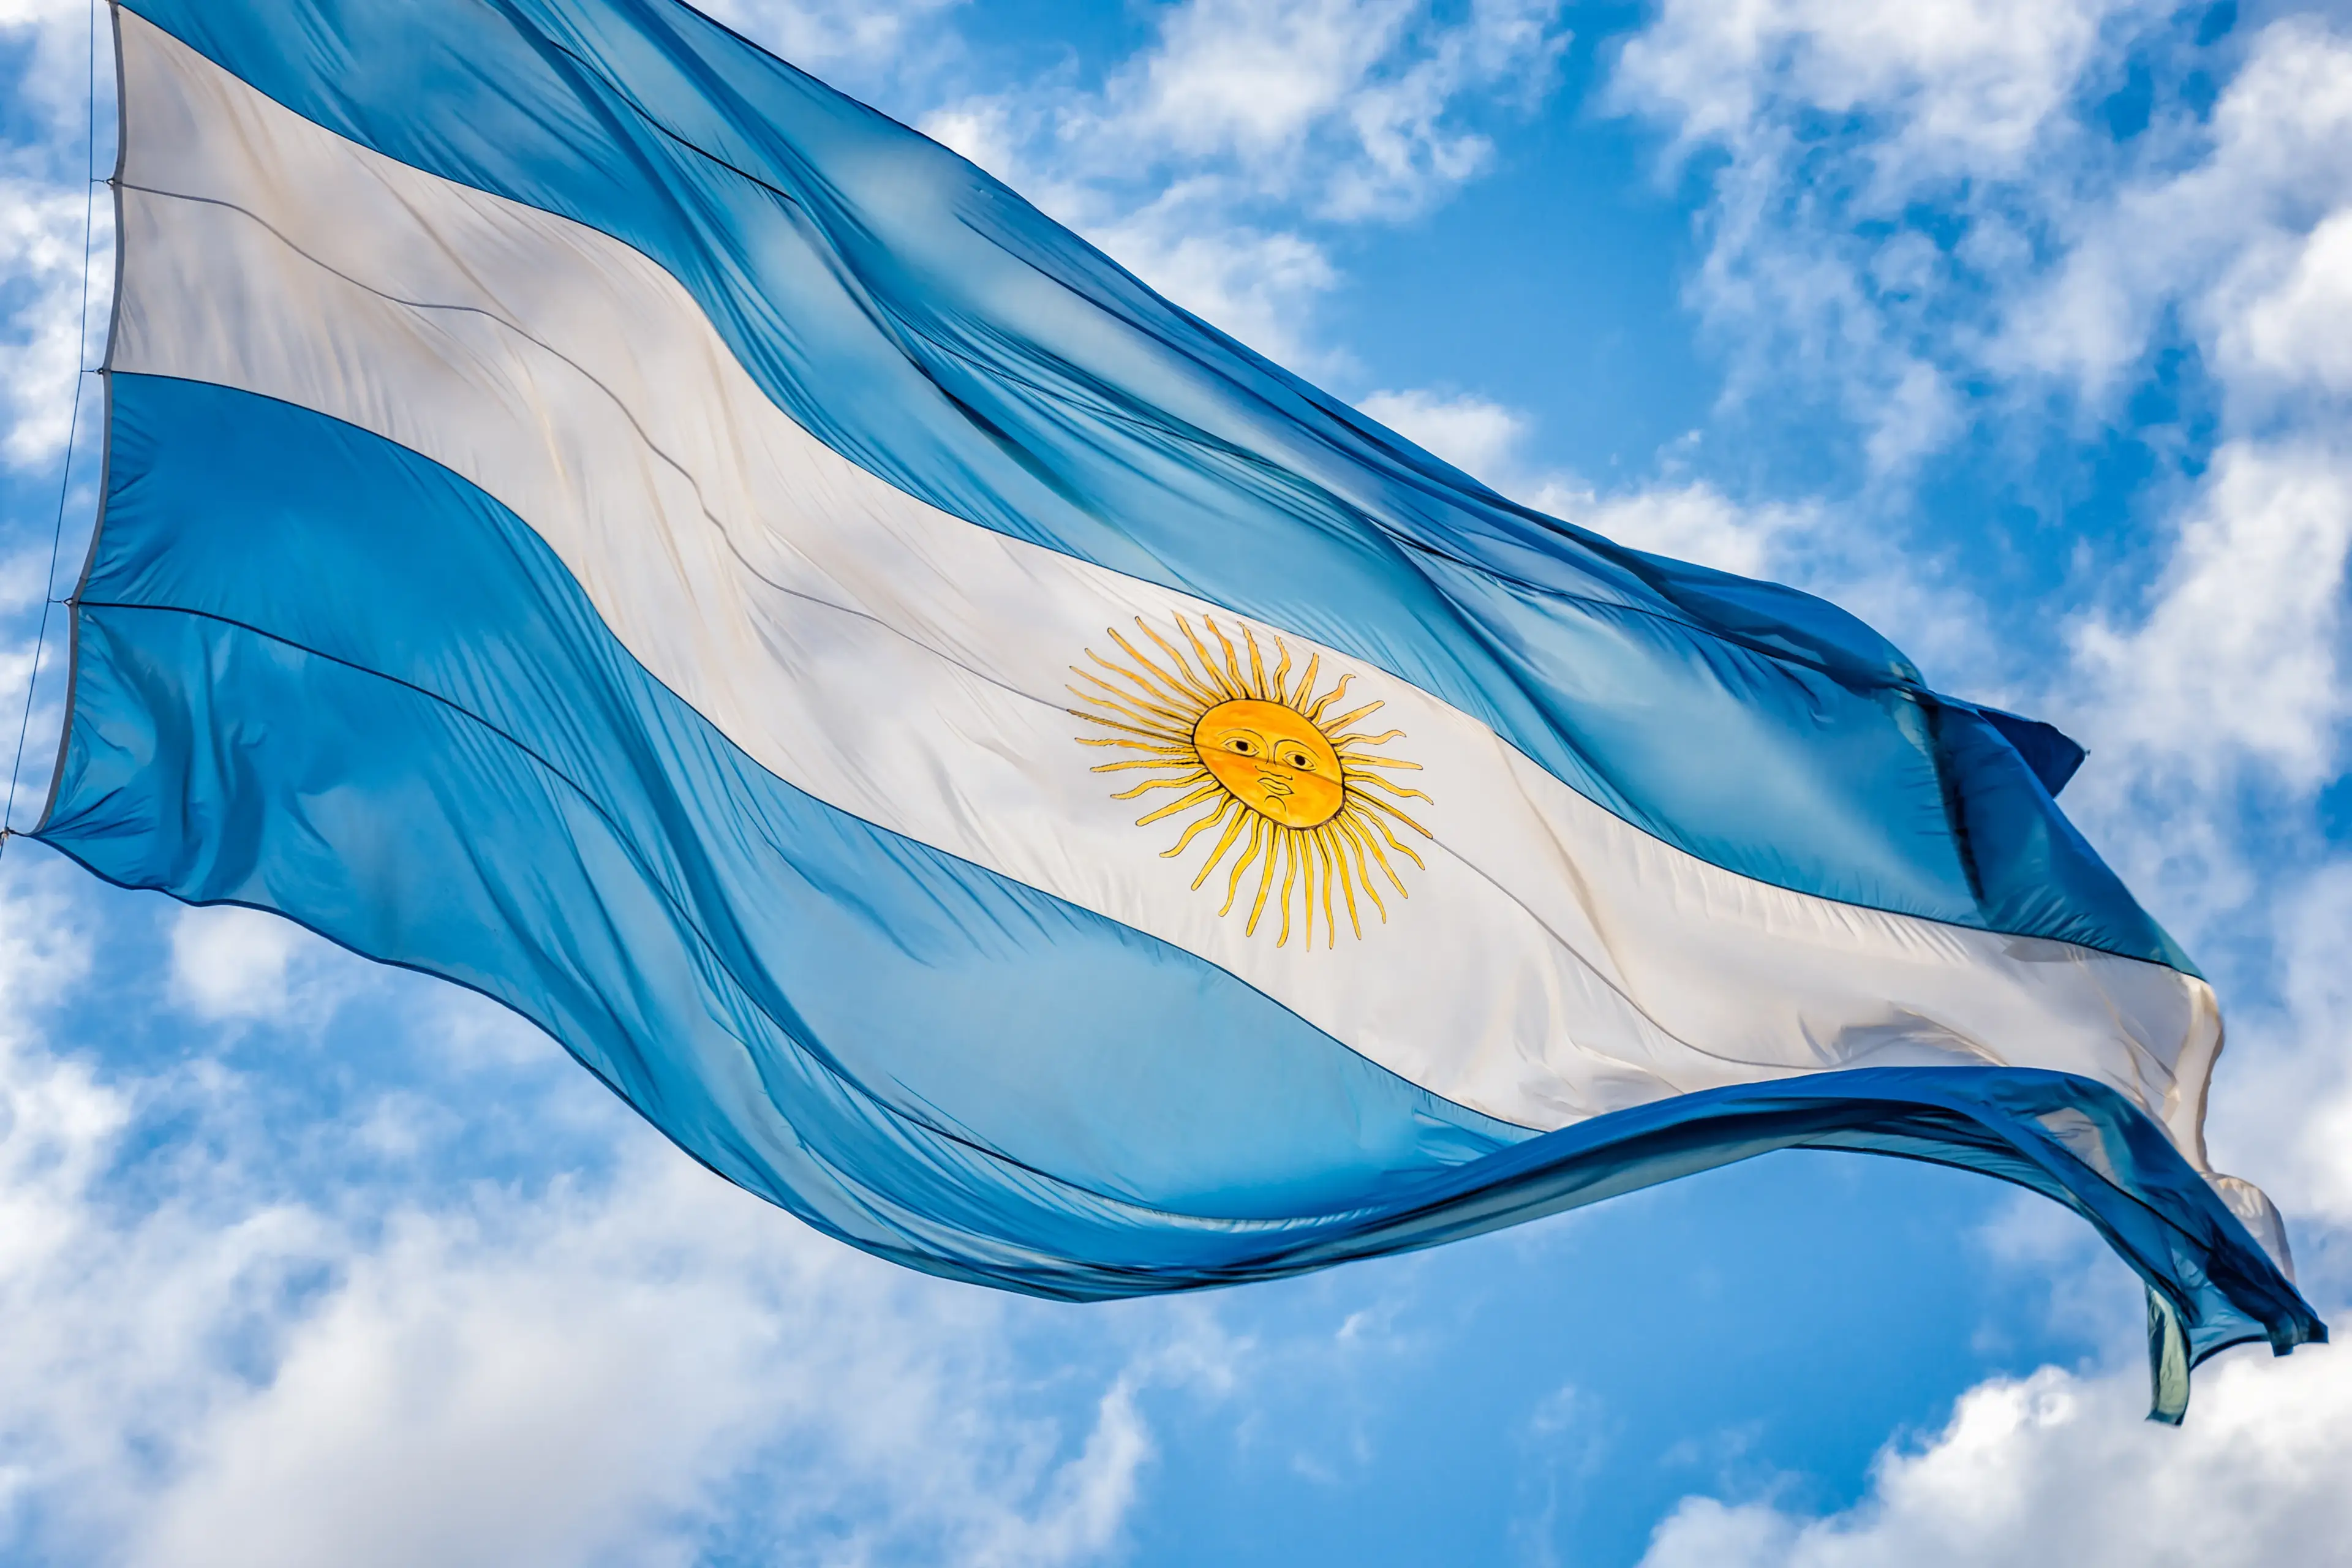 Argentina: I Love You But I’m Not In Love With You